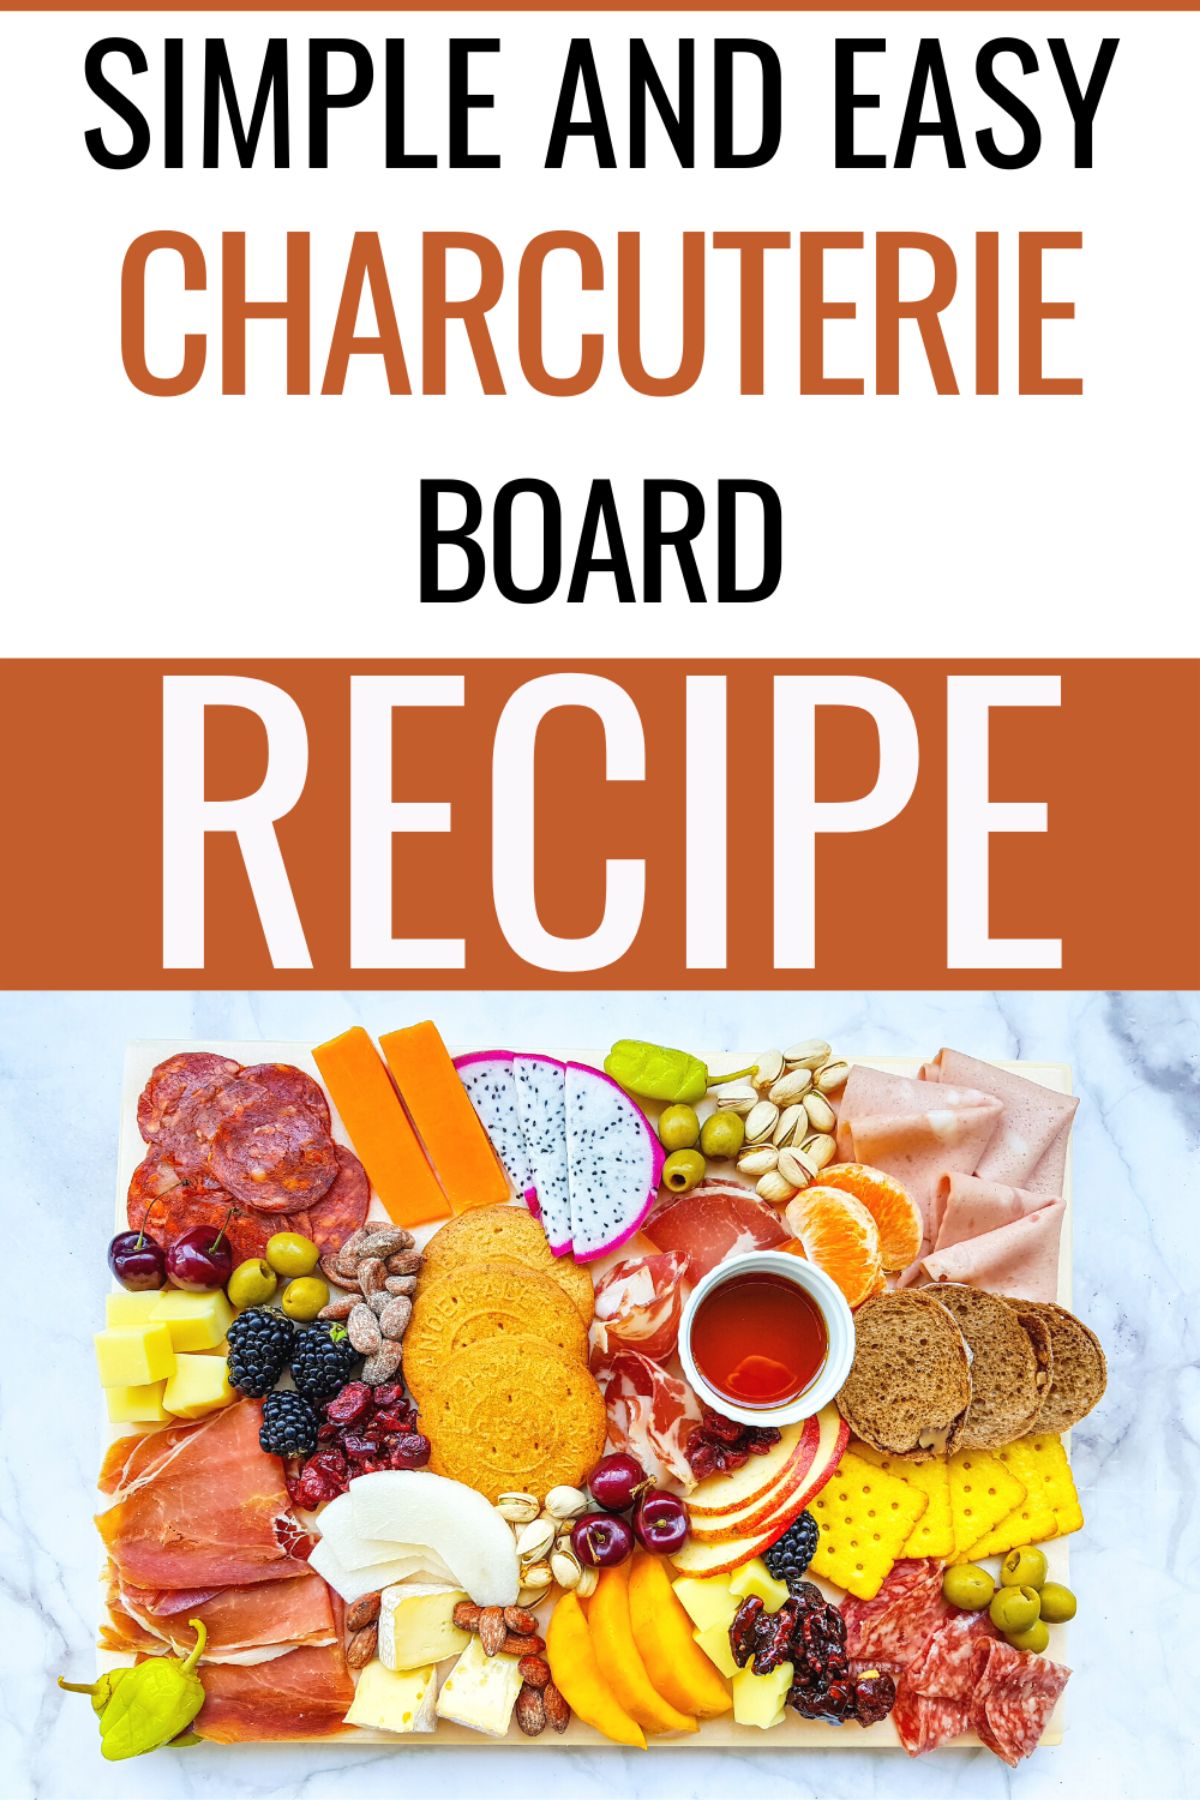 This Simple Charcuterie Board is the perfect party appetizer. It’s simple to put together, and there are endless possibilities for toppings. #simplecharcuterieboard #charcuterieboard #easycharcuterieboard #charcuterieboardideas via @wondermomwannab